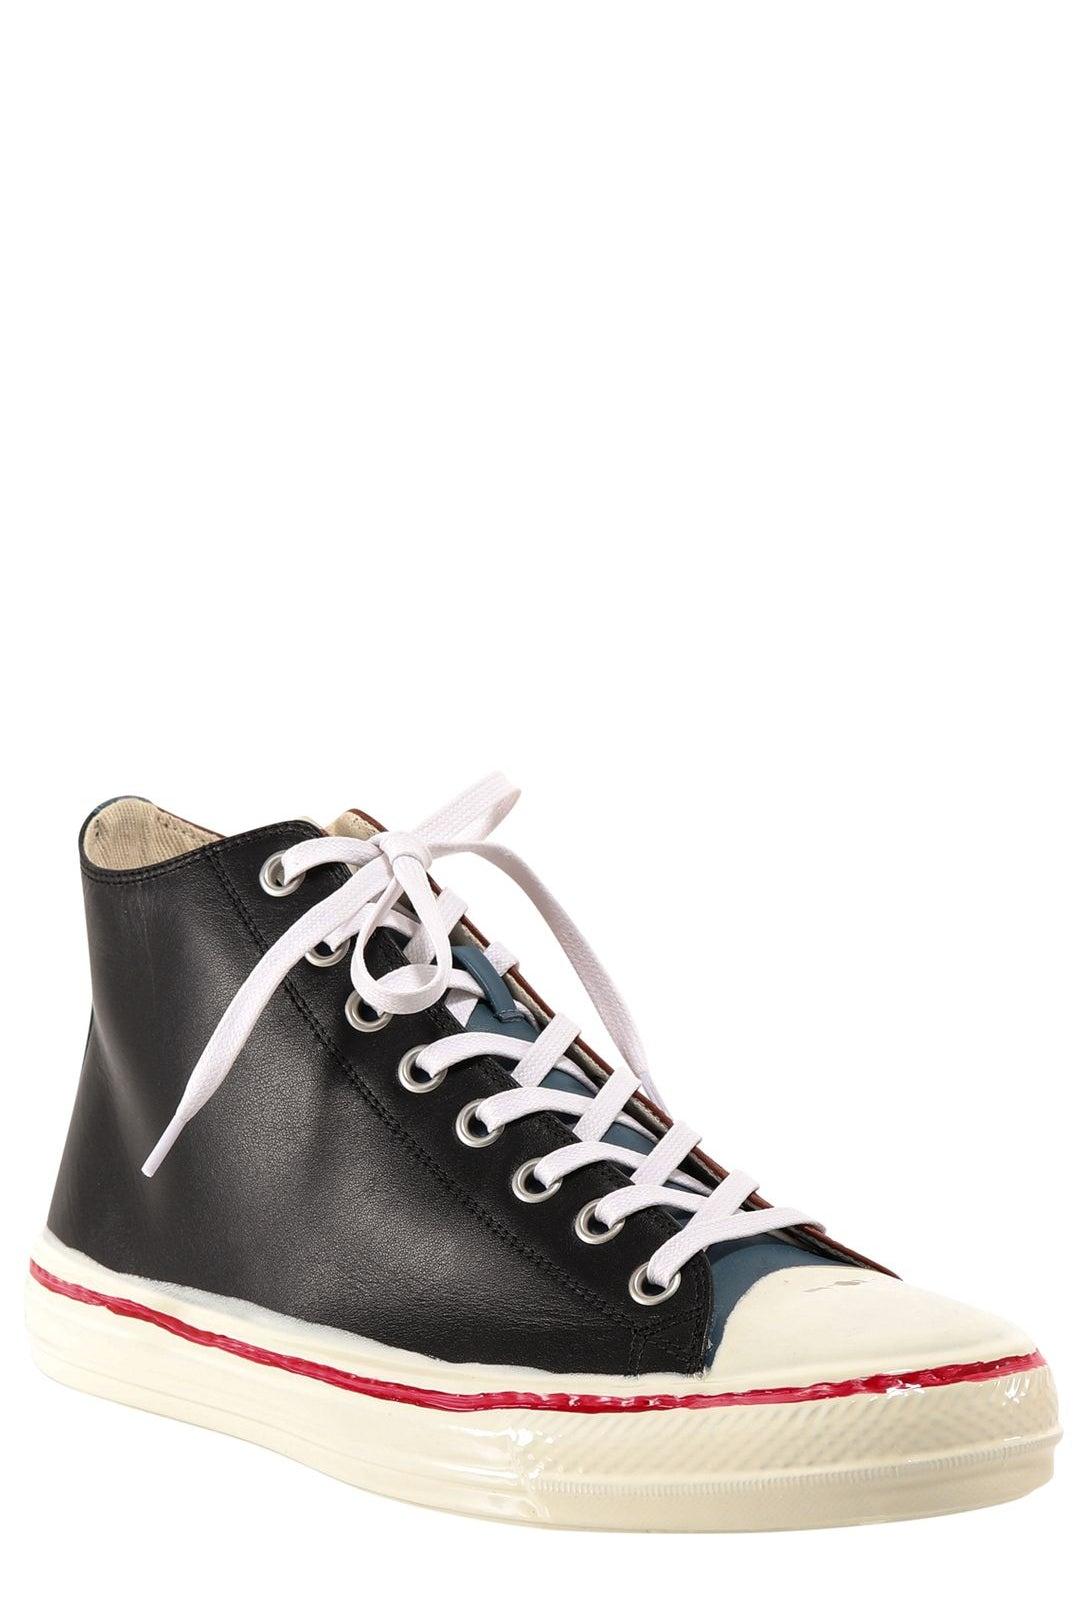 Marni Leather Gooey High-top Sneakers for Men - Lyst